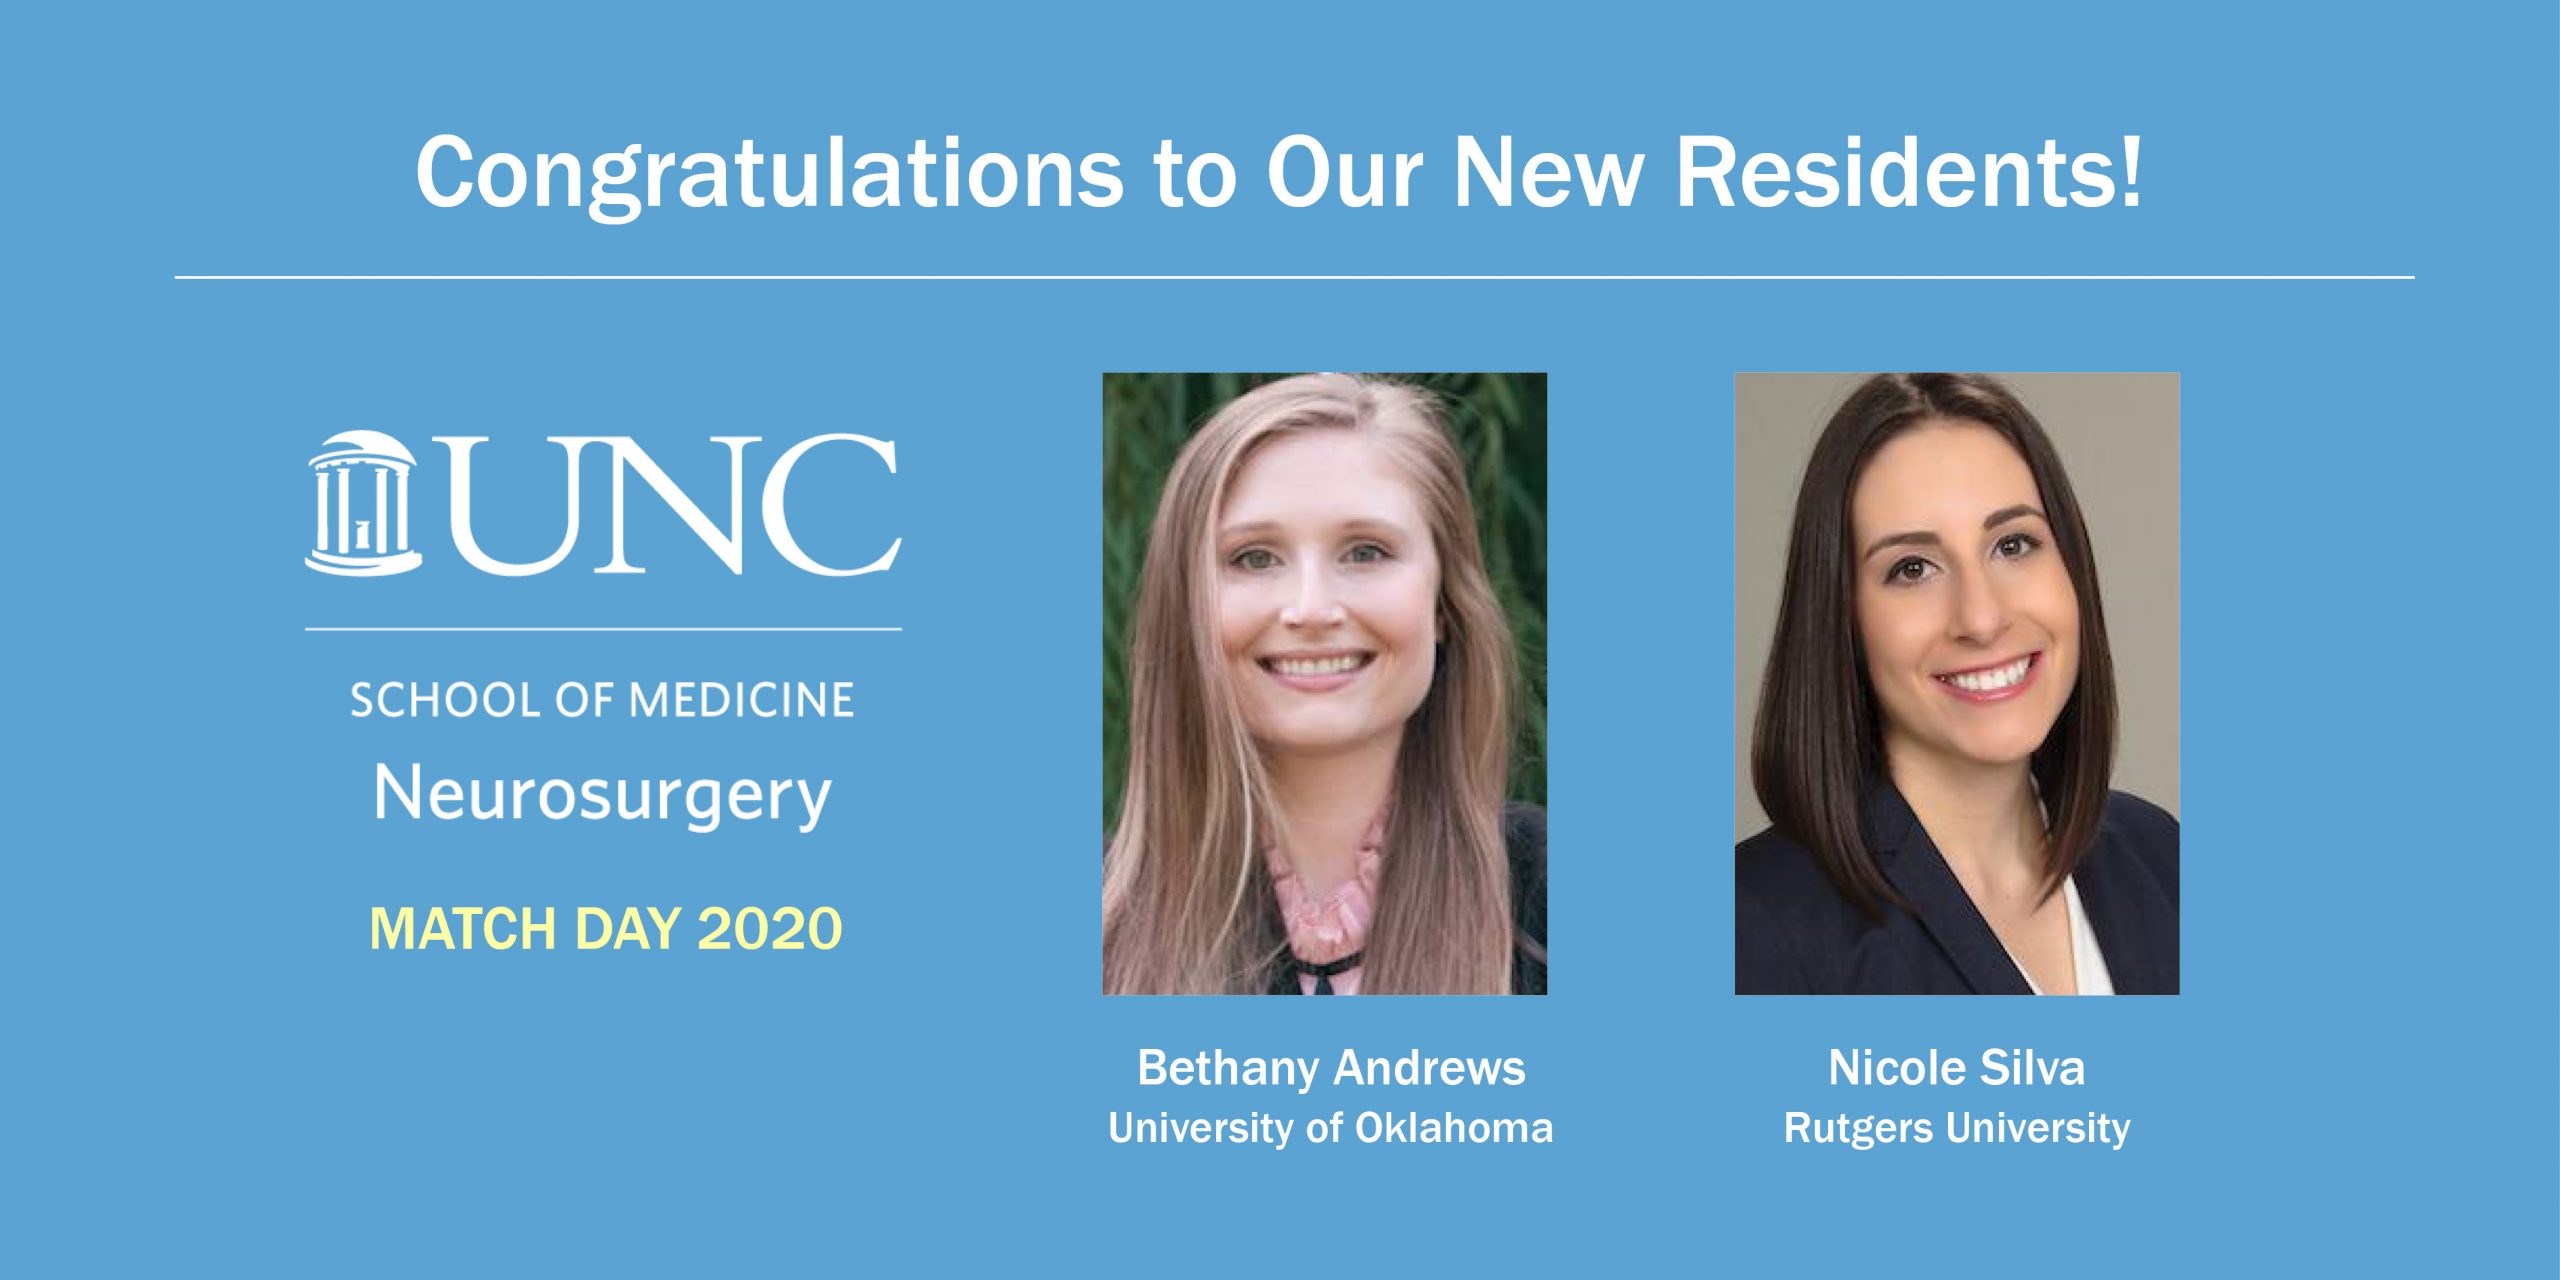 Welcome to our new residents, Bethany Andrews and Nicole Silva